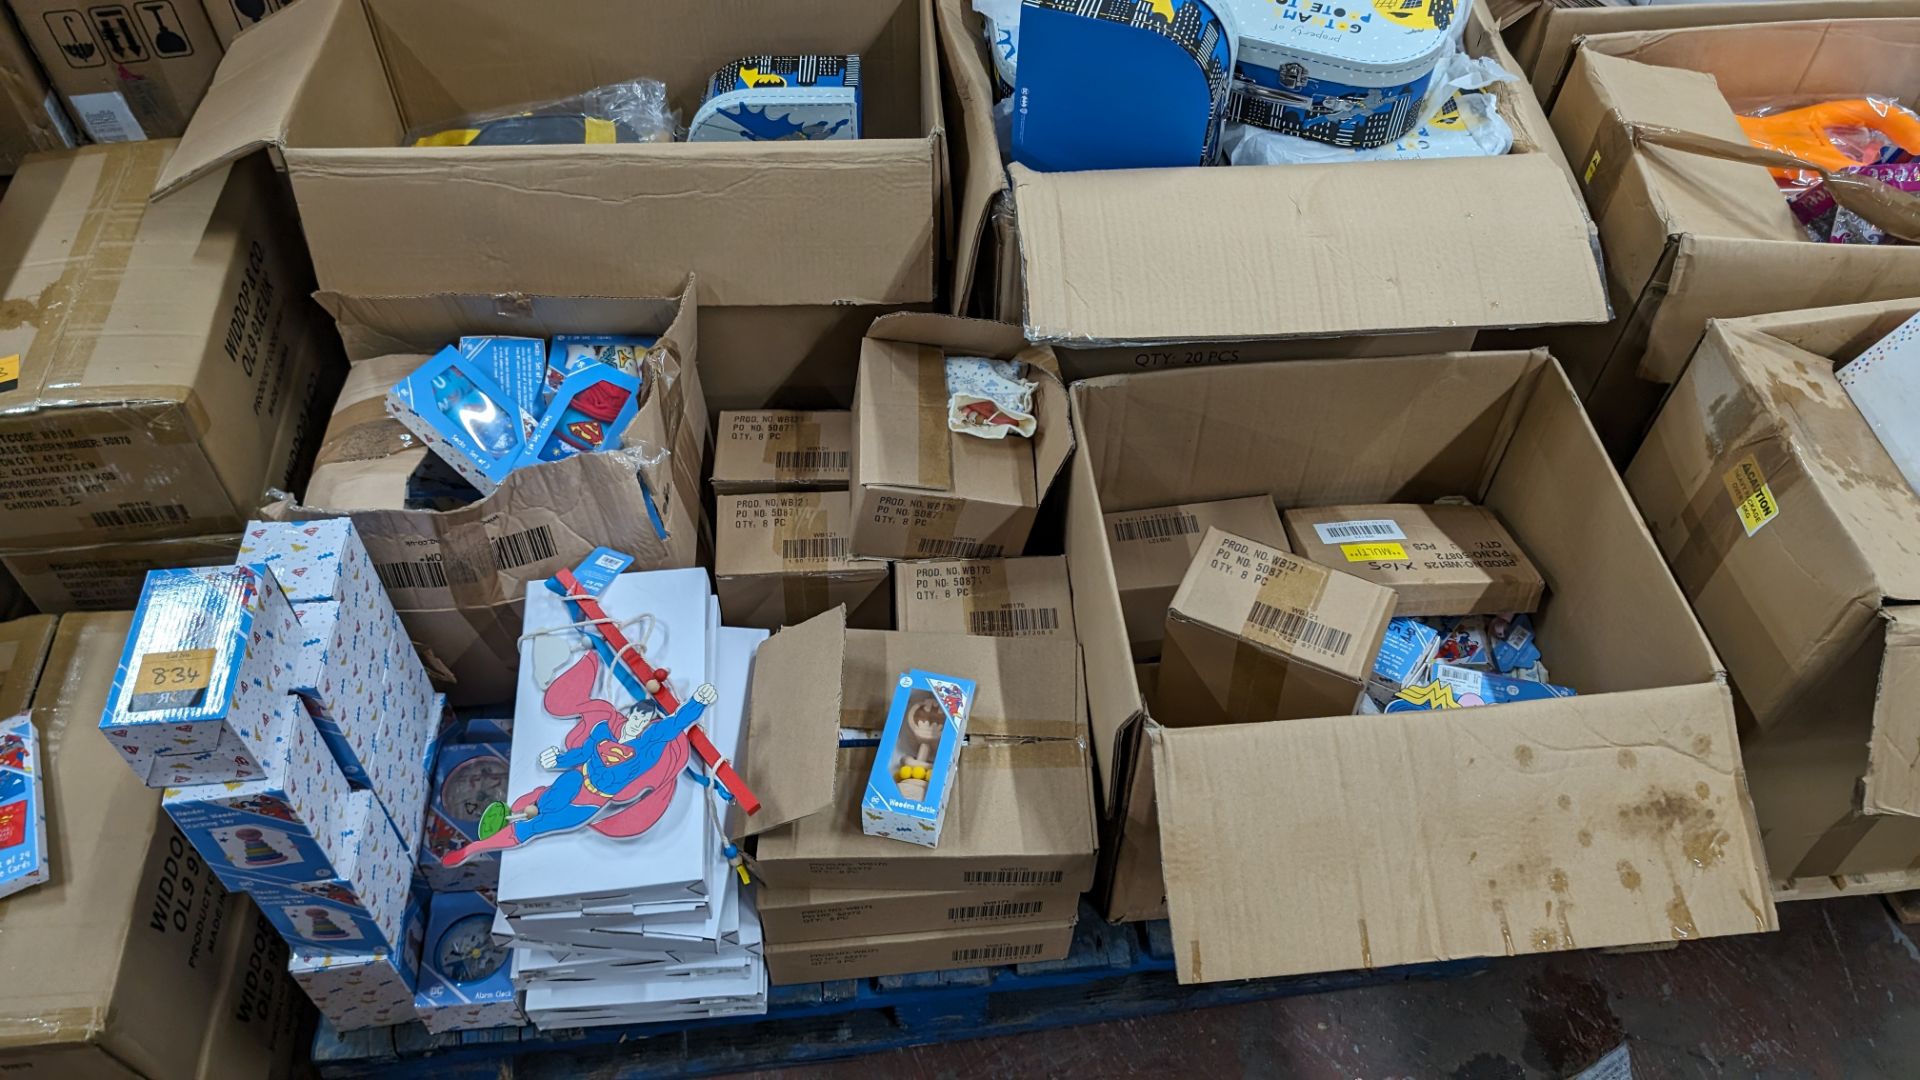 The contents of a pallet of Super Hero gifts including socks, hanging signs, alarm clocks, stacking